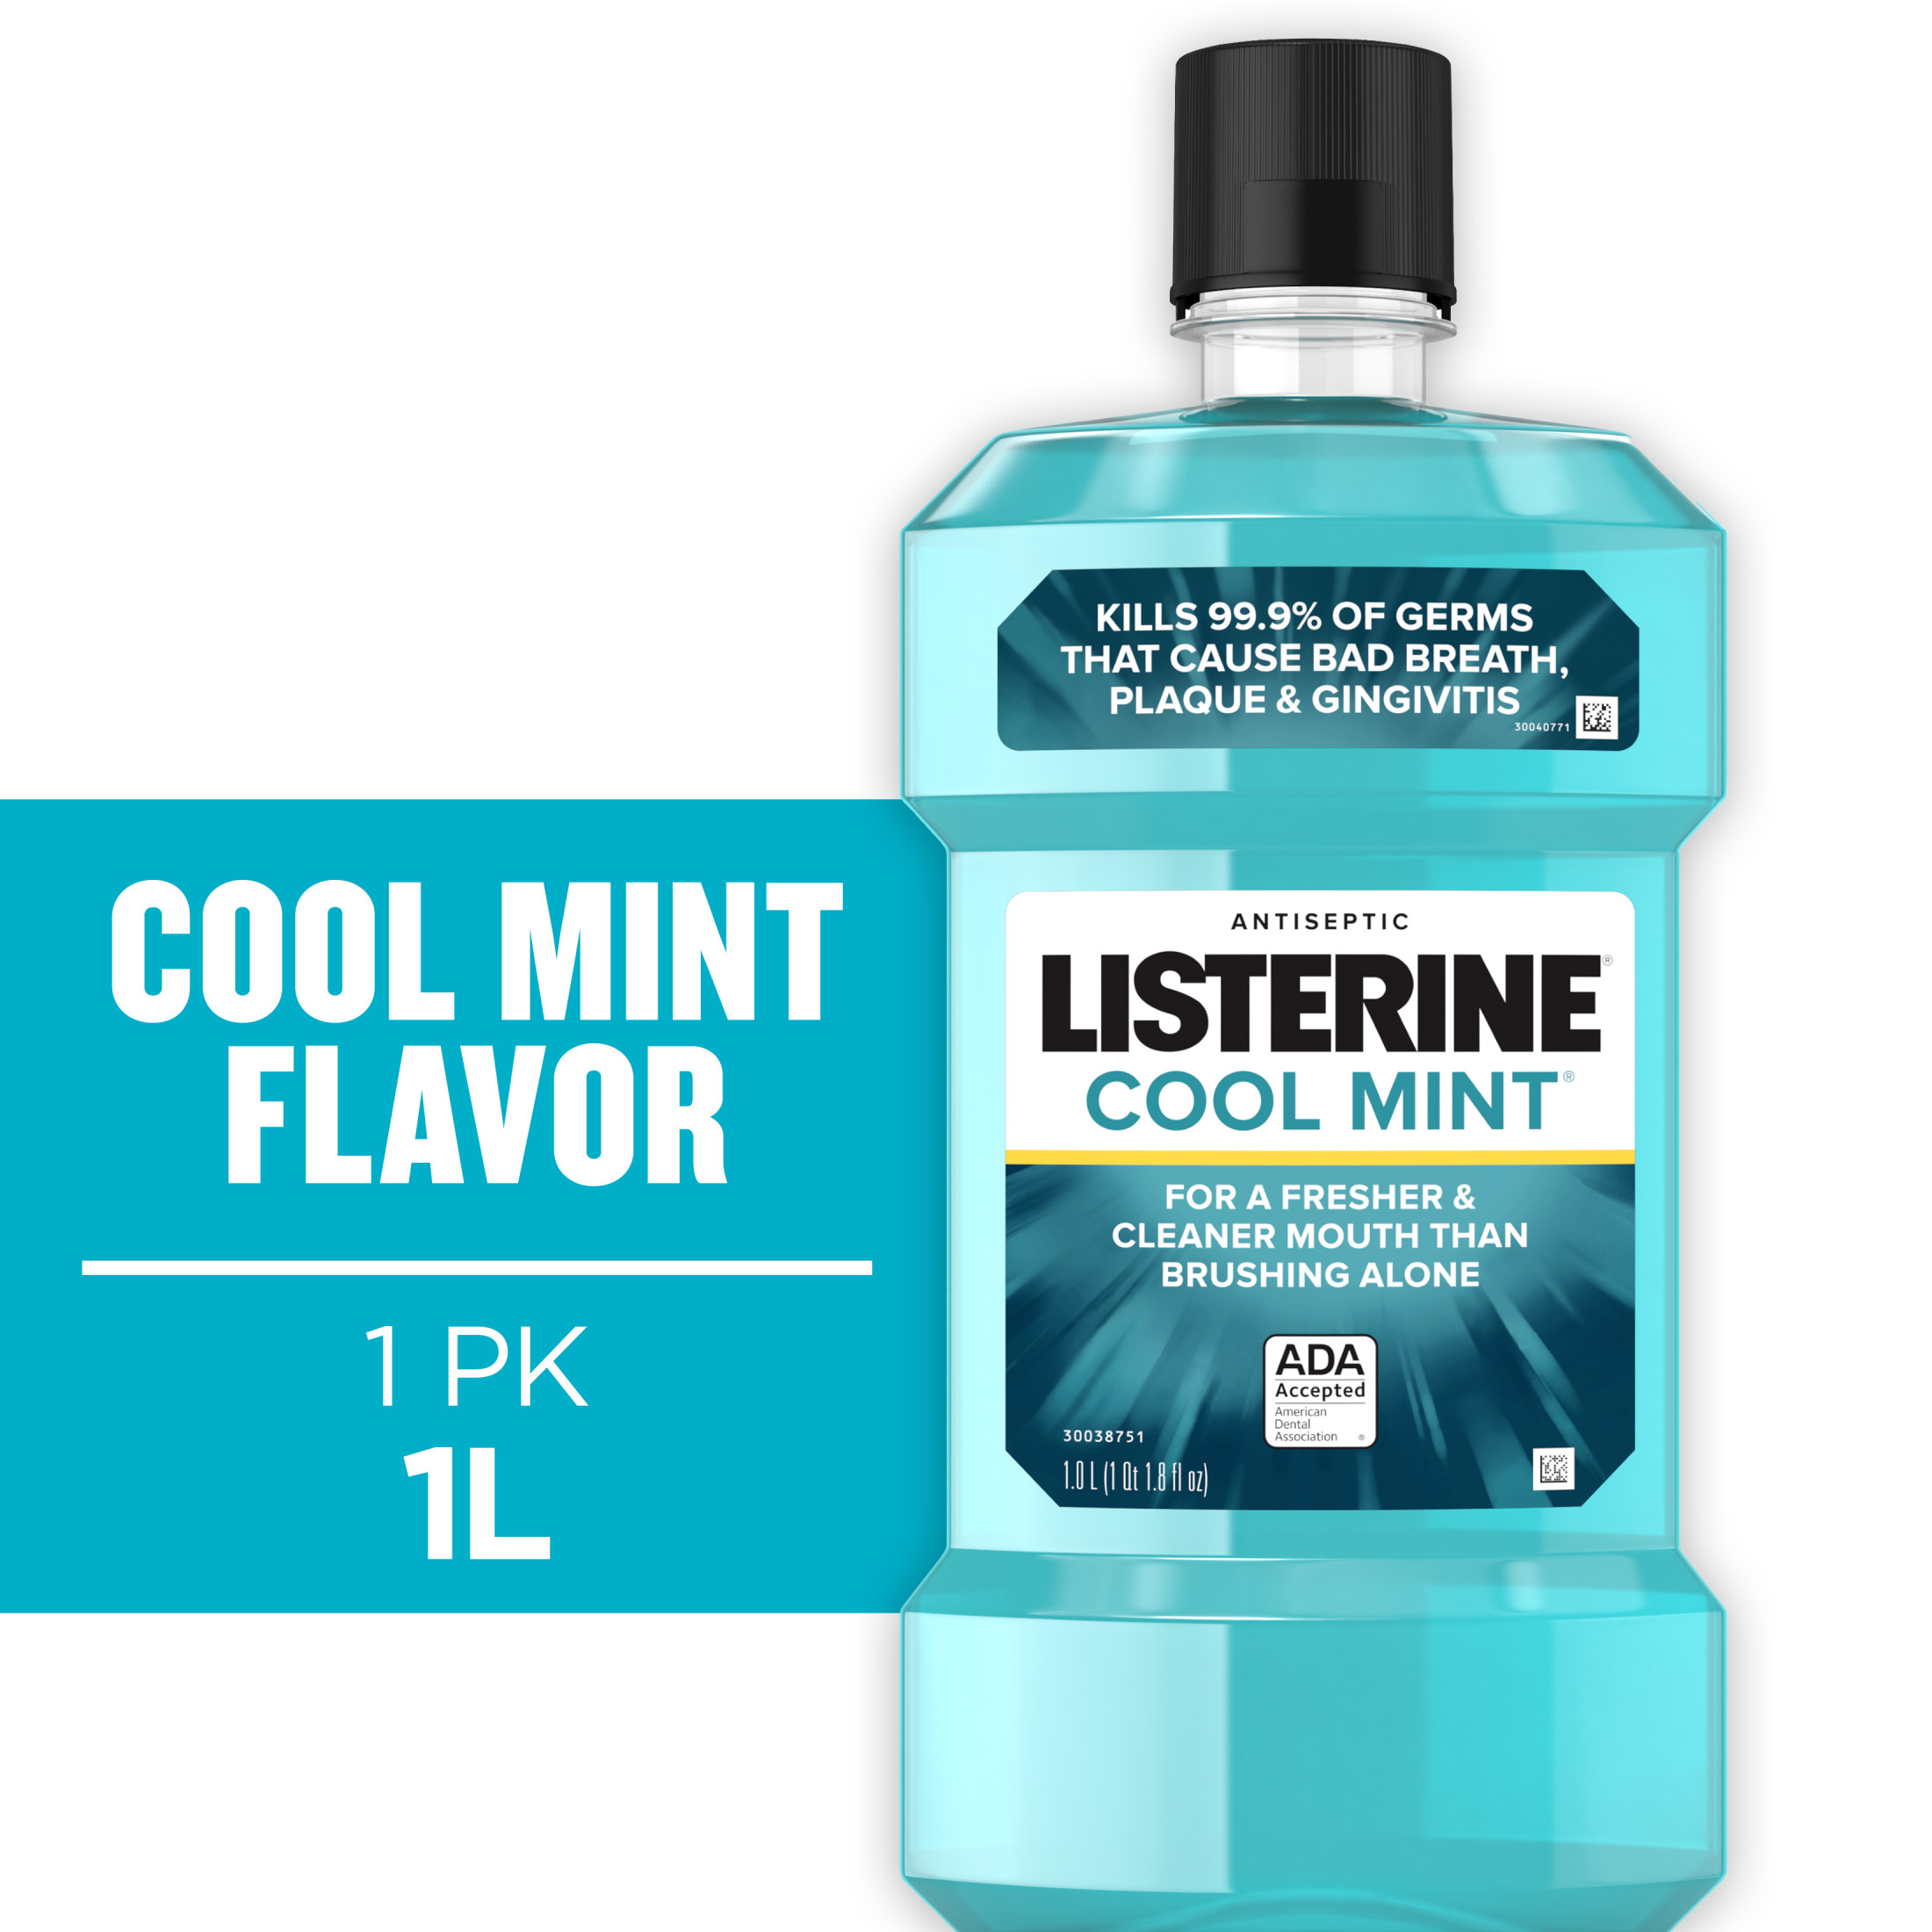 Listerine Cool Mint Antiseptic Mouthwash/Mouth Rinse for Bad Breath & Plaque, 1 L - image 1 of 12